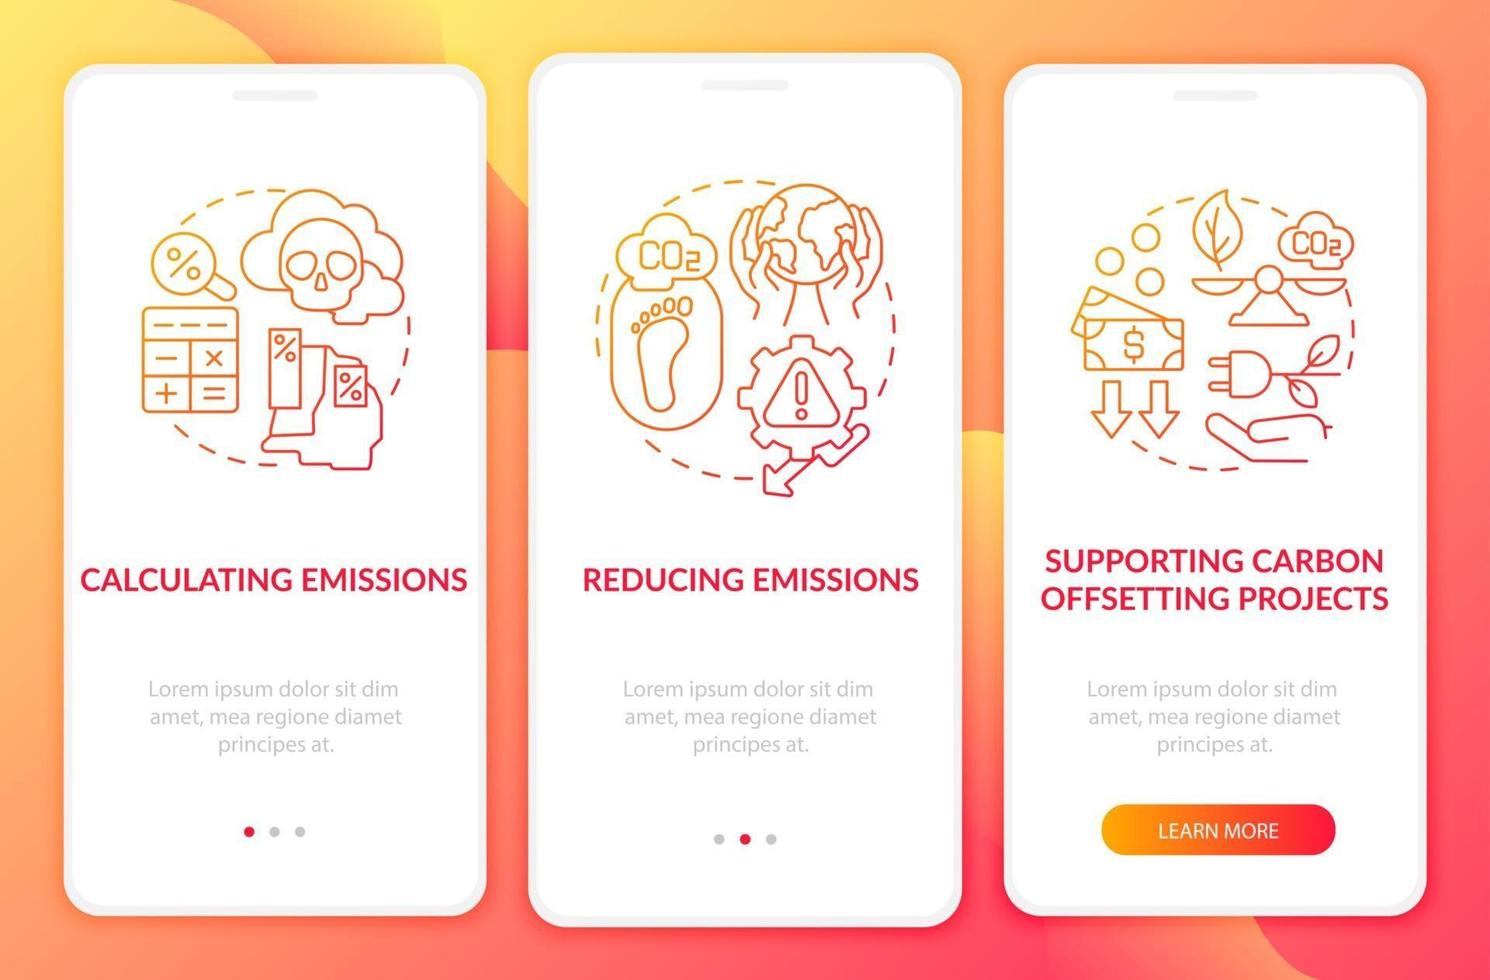 Carbon neutrality onboarding mobile app page screen with concepts. Carbon offsetting projects walkthrough 3 steps graphic instructions. UI, UX, GUI vector template with linear color illustrations